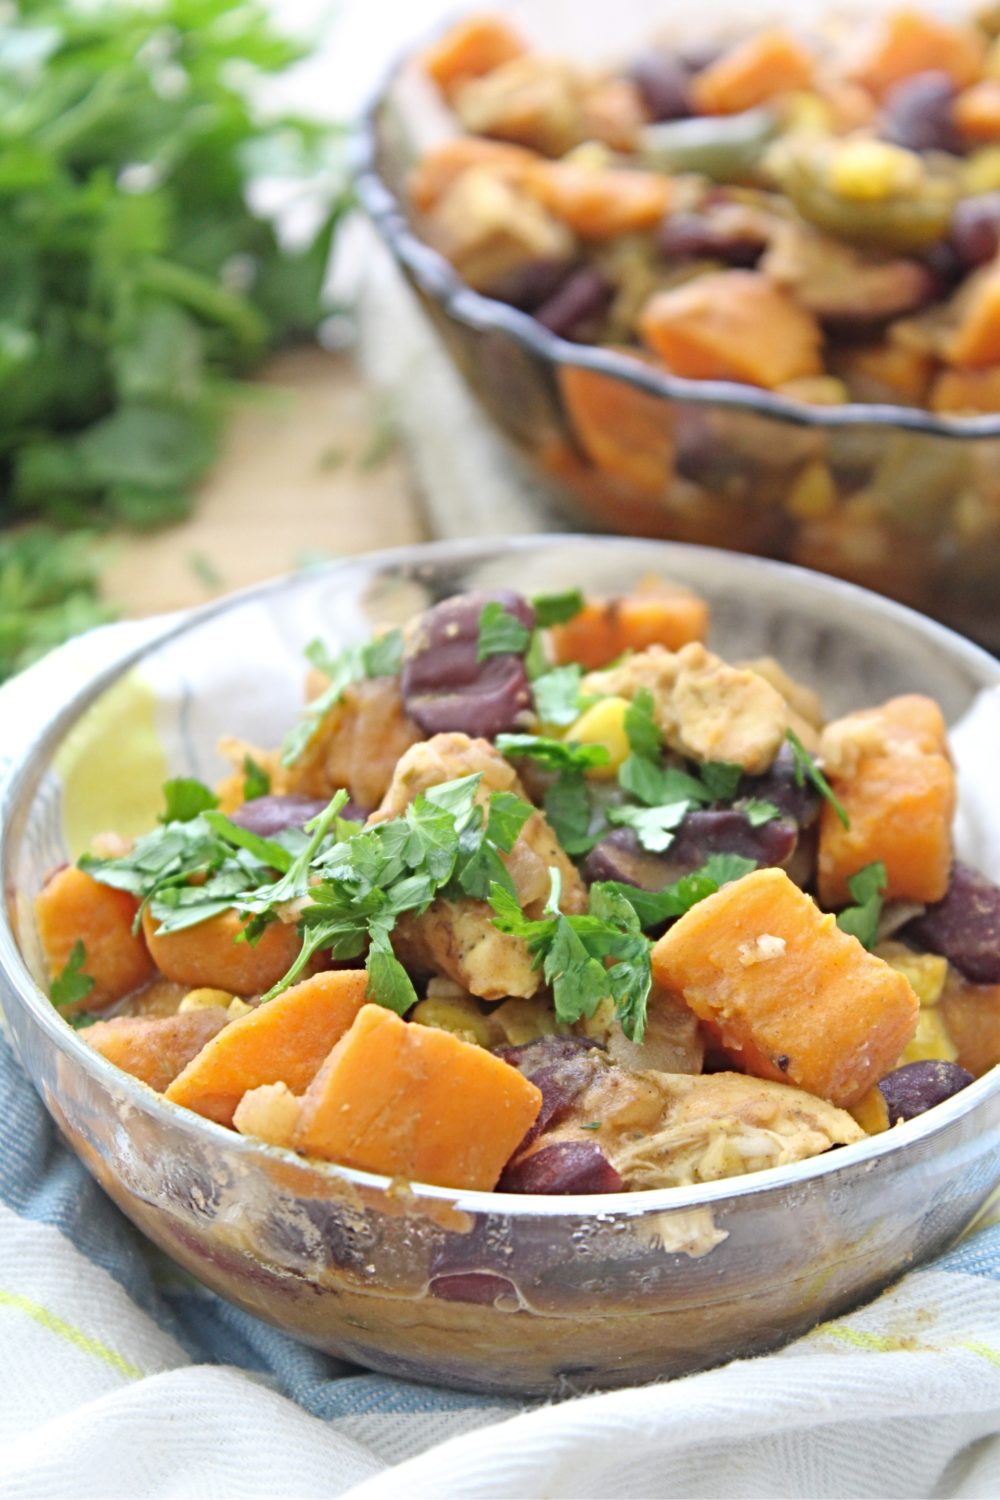 Transparent bowl of Healthy chicken chili with sweet potatoes sprinkled with fresh parsley